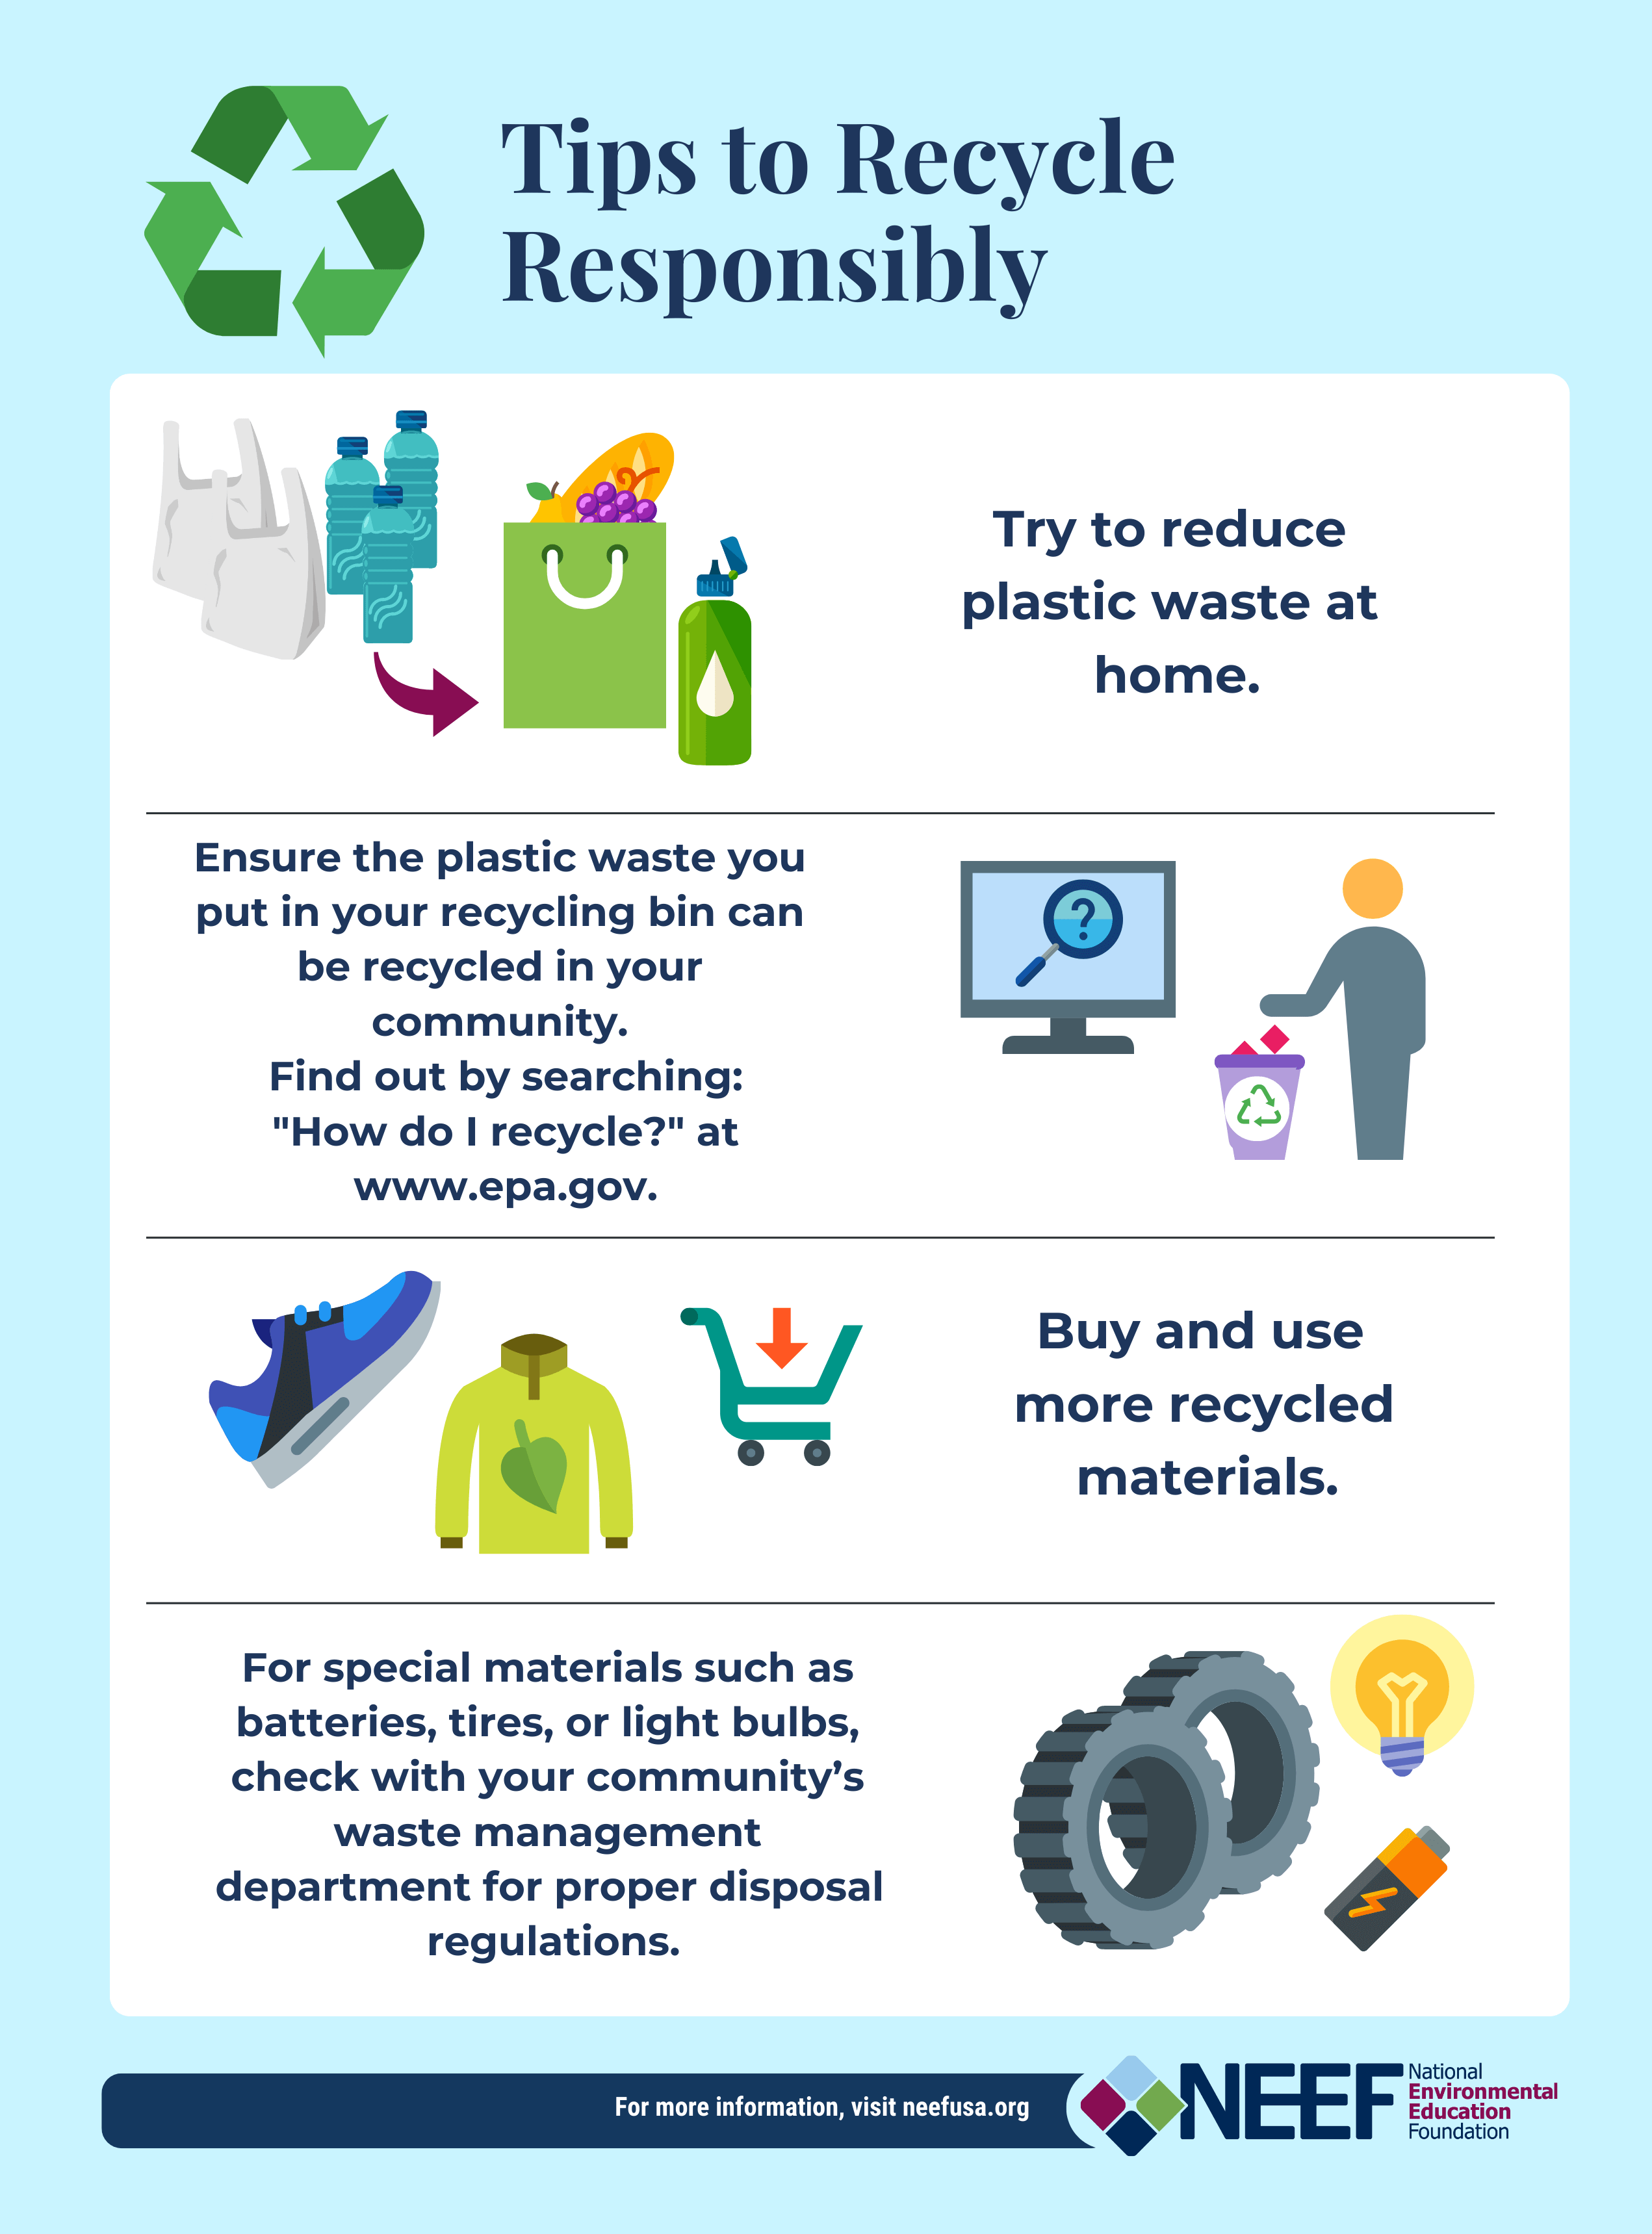 Tips to recycle responsibly graphic